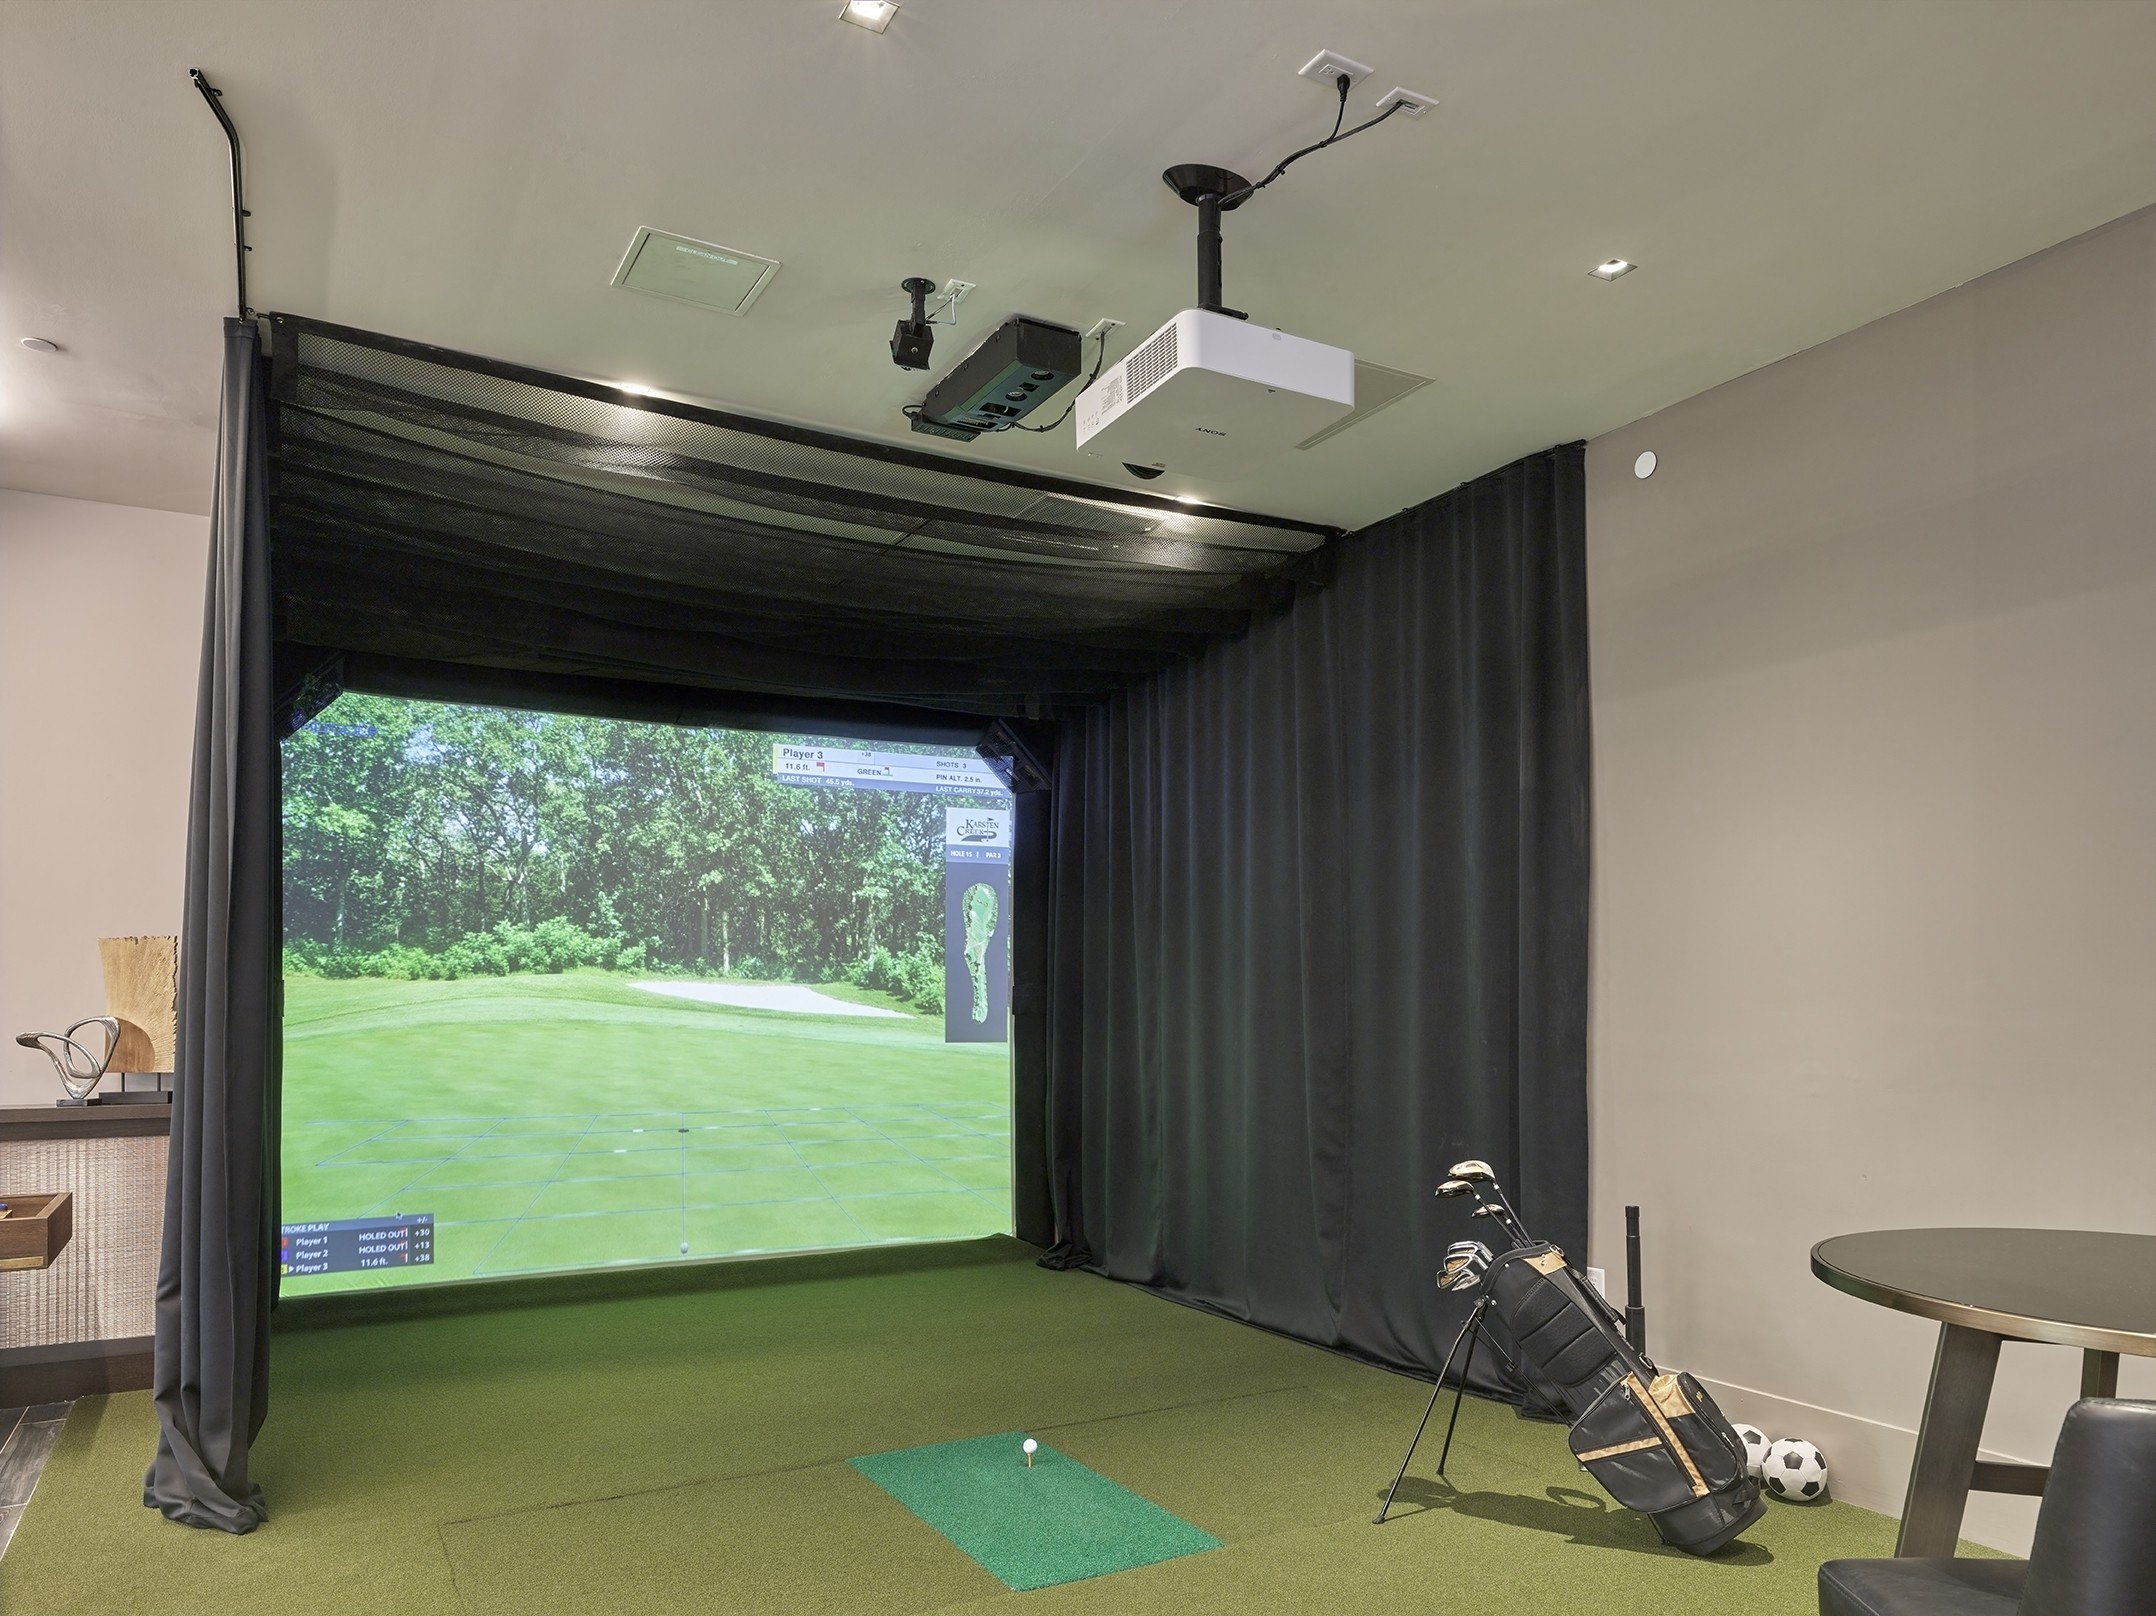 game room, sport simulator, amenity room, clubhouse